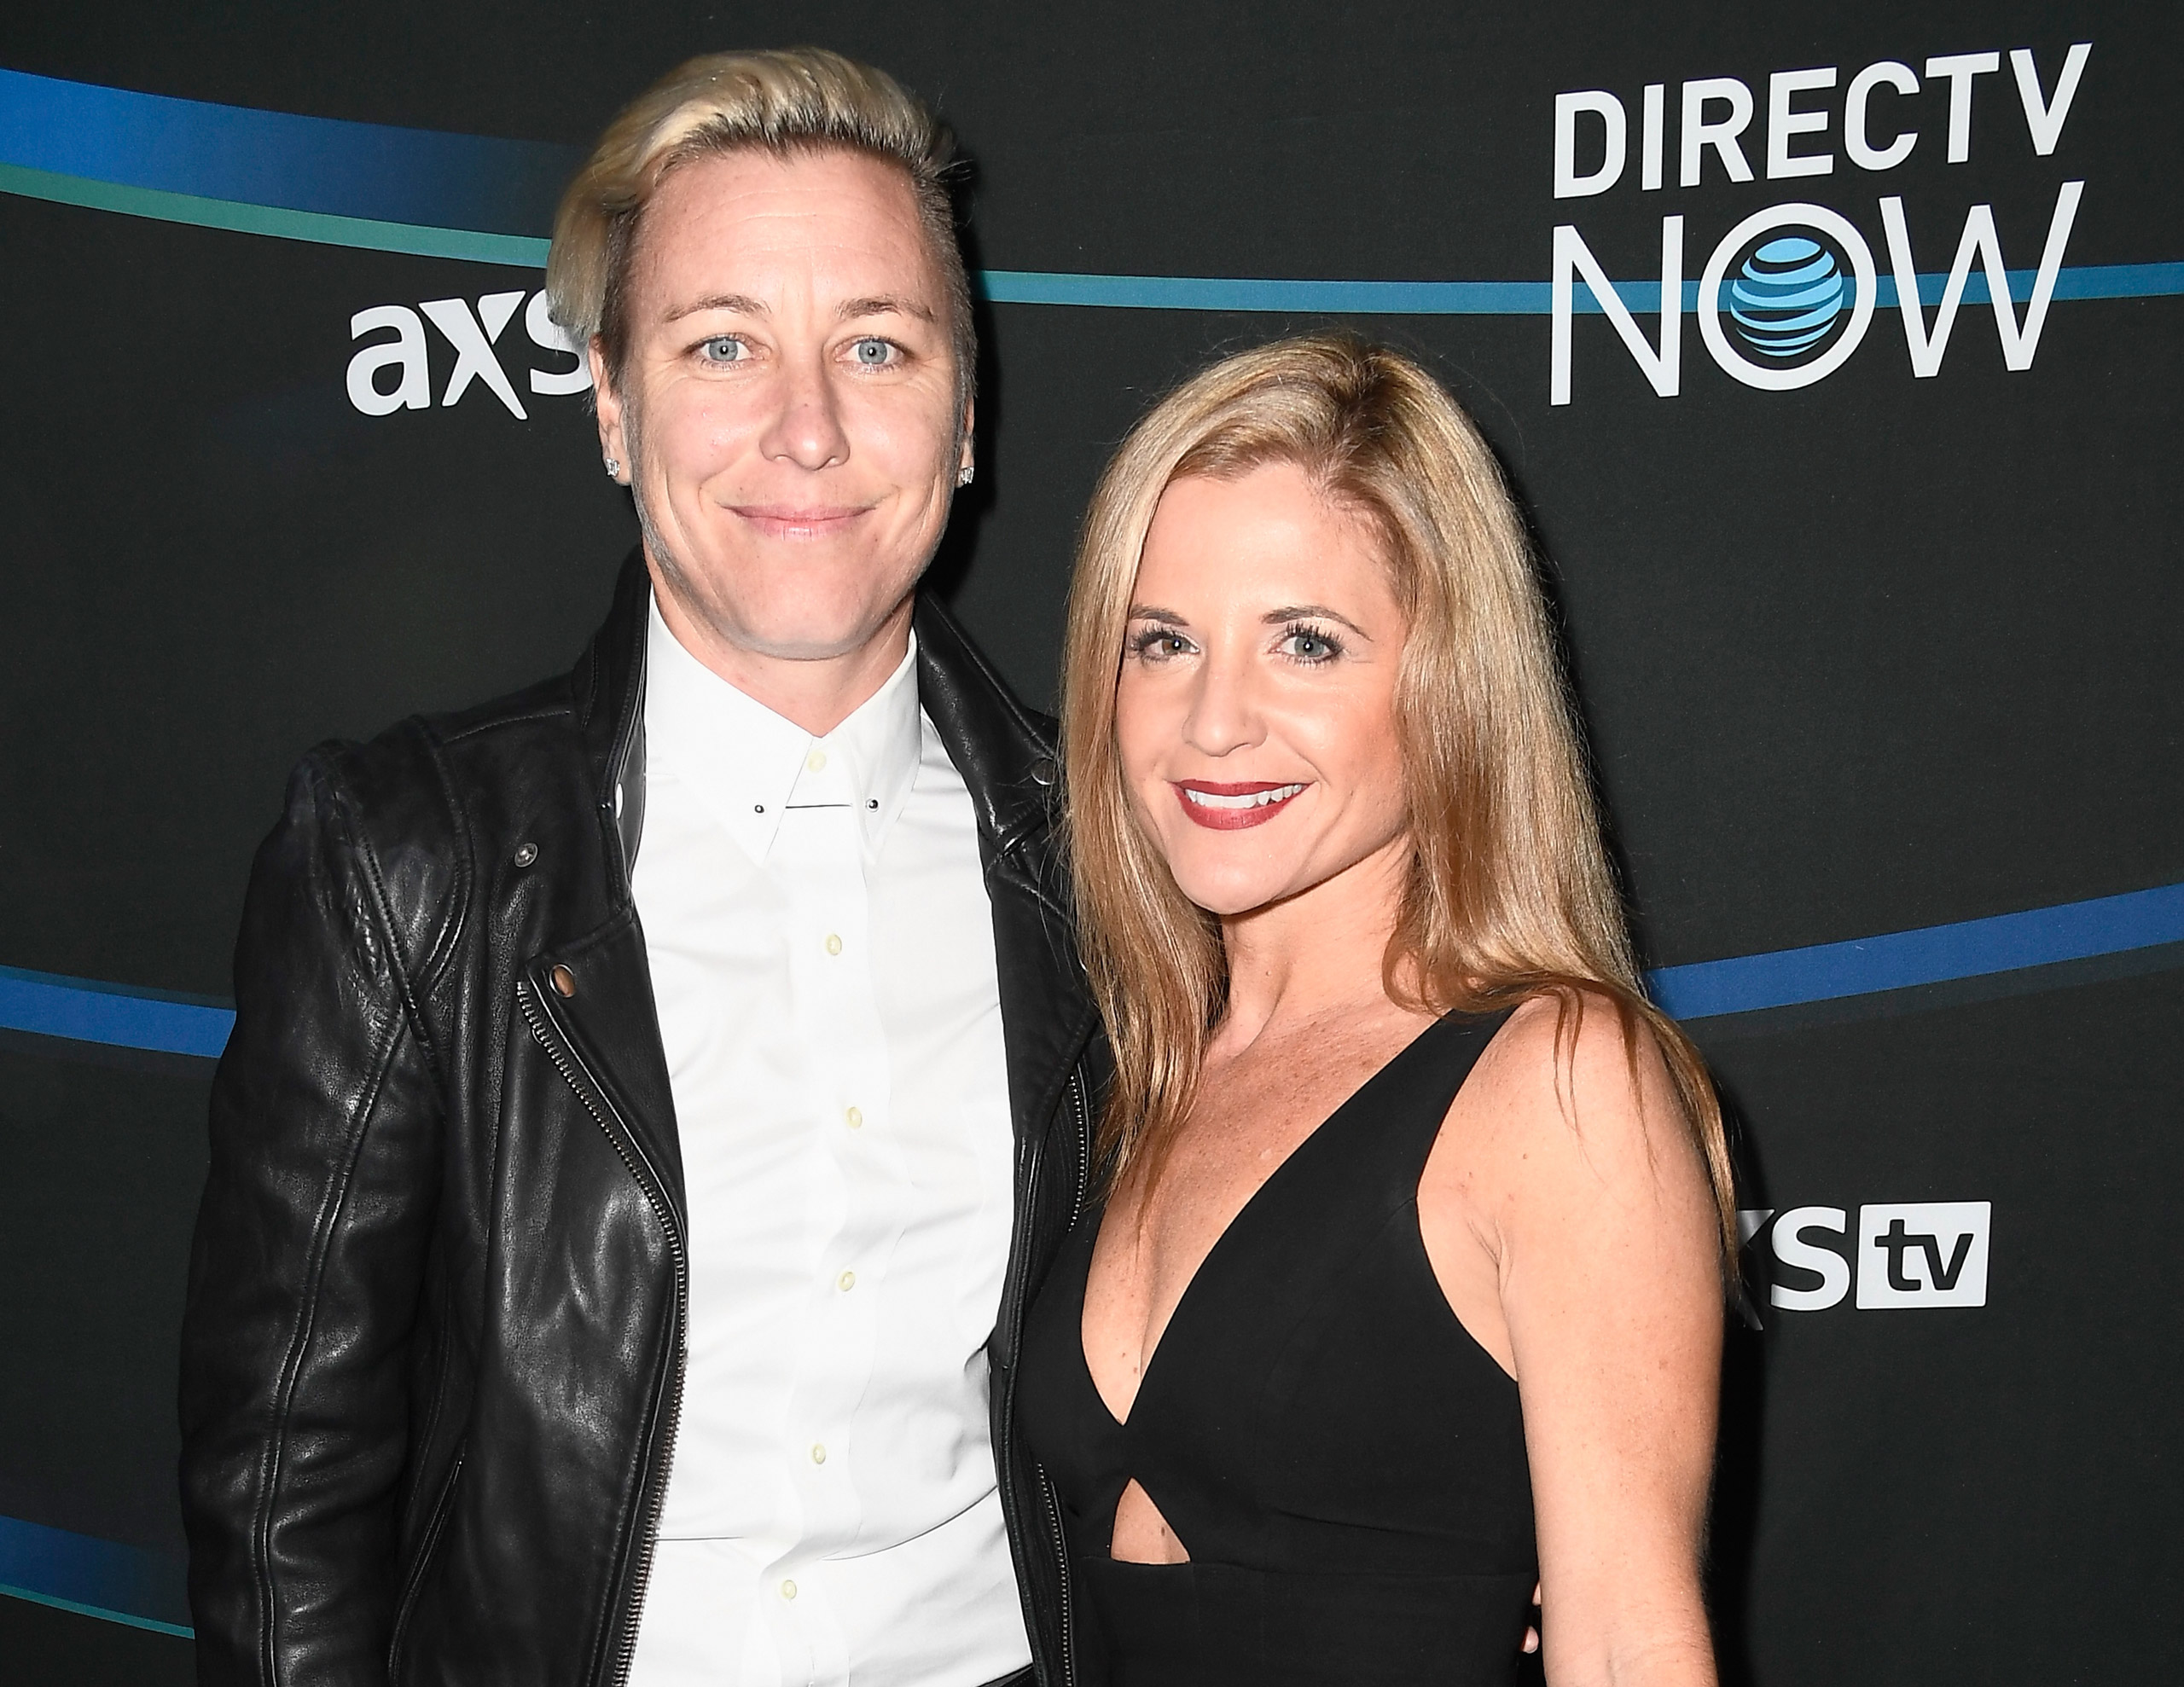 Former U.S. Women's Soccer player Abby Wambach (left) and Glennon Doyle Melton attend the 2017 DIRECTV NOW Super Saturday Night Concert at Club Nomadic in Houston on Feb. 4, 2017. (Frazer Harrison—Getty Images for DIRECTV)